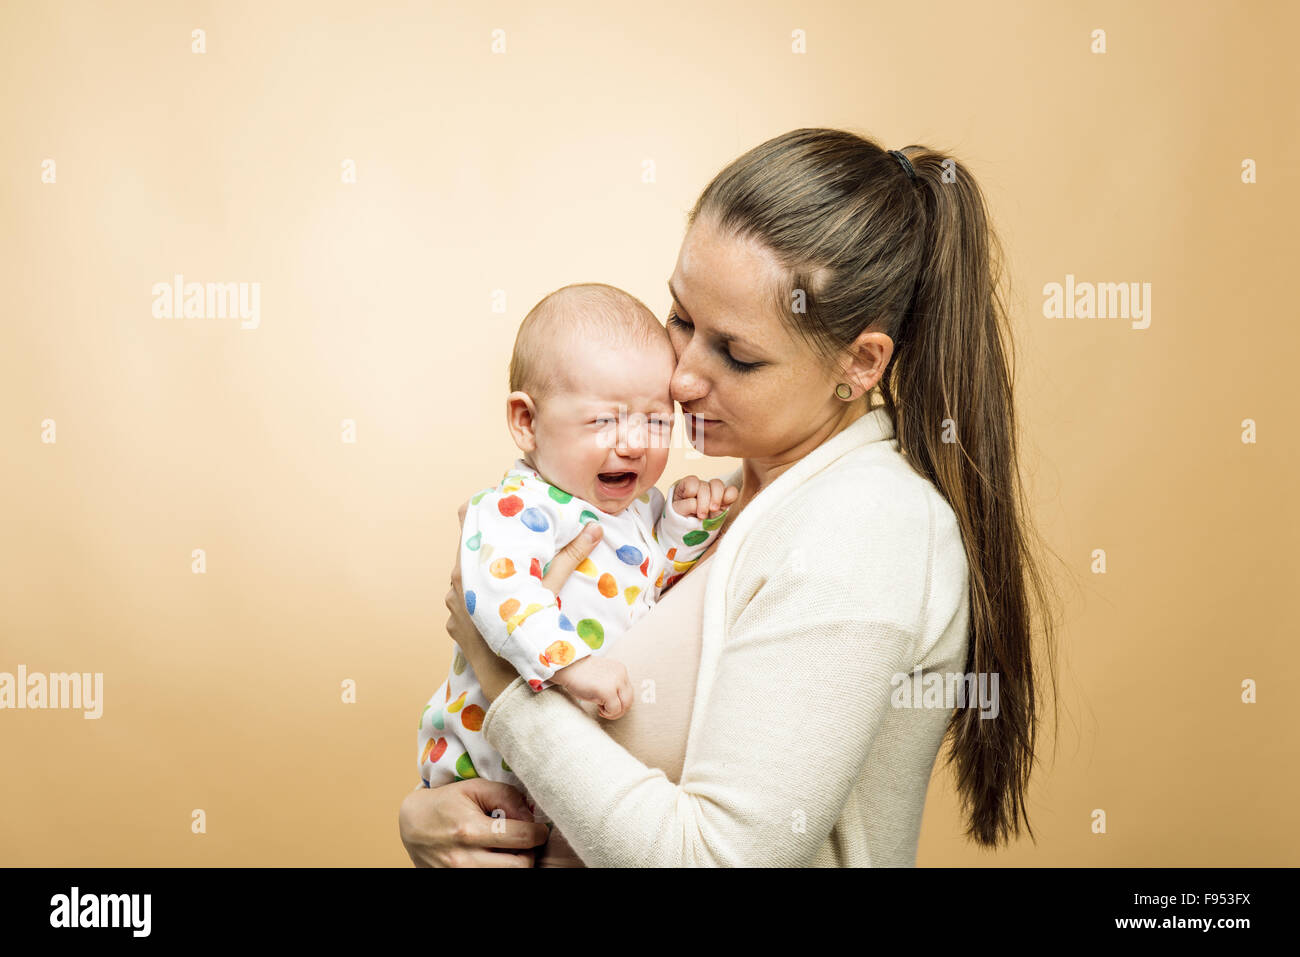 Crying child with mother studio shot on beige background Stock Photo